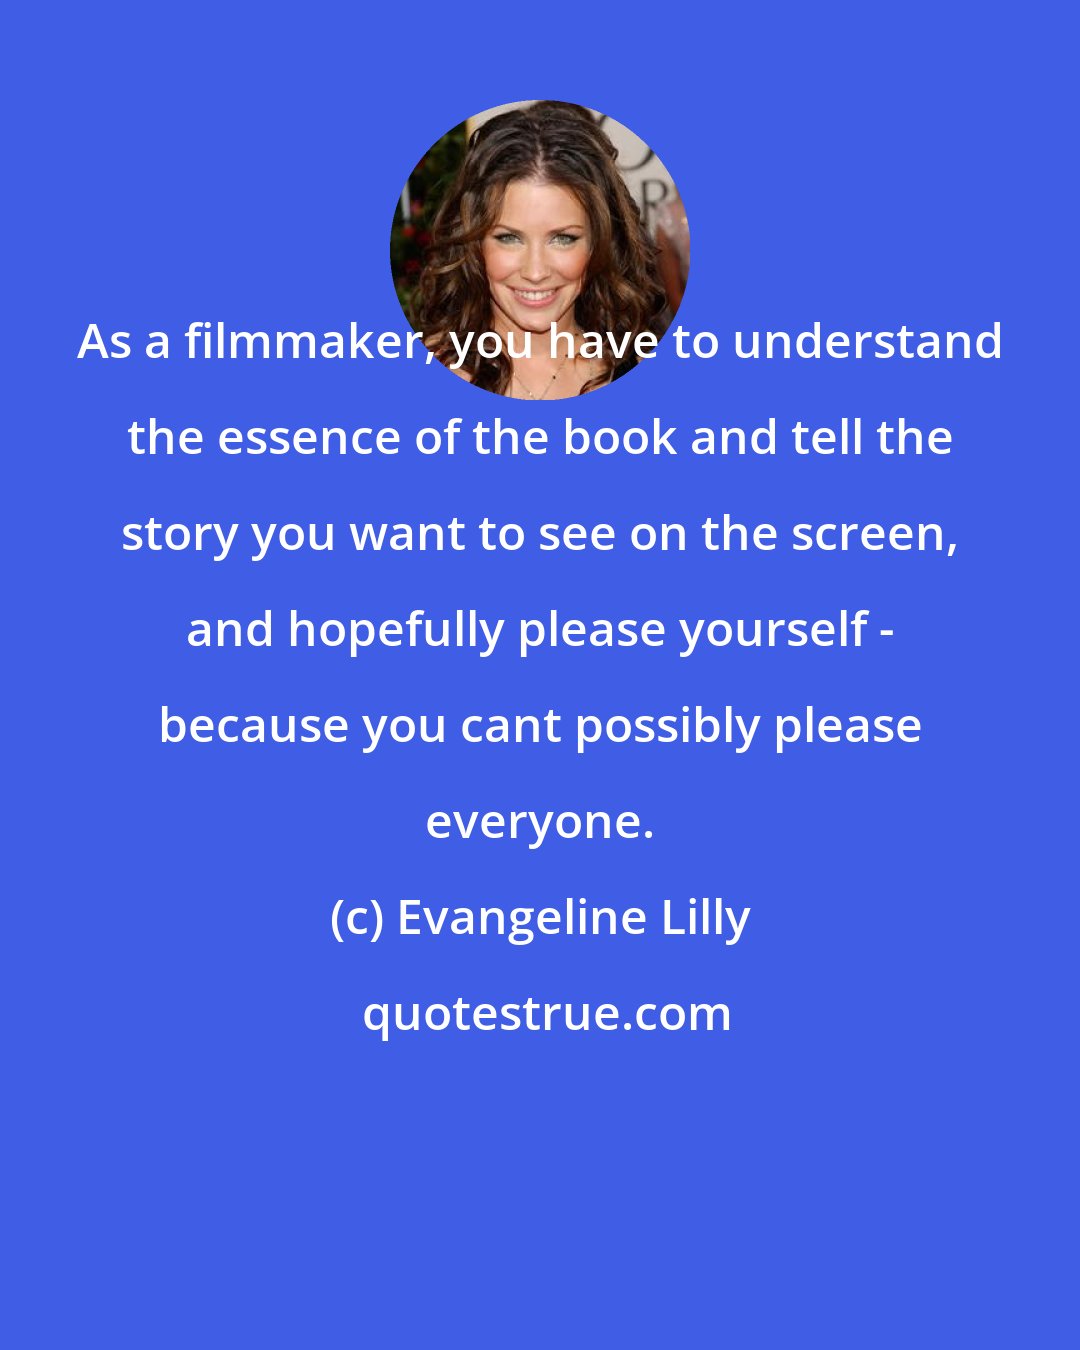 Evangeline Lilly: As a filmmaker, you have to understand the essence of the book and tell the story you want to see on the screen, and hopefully please yourself - because you cant possibly please everyone.